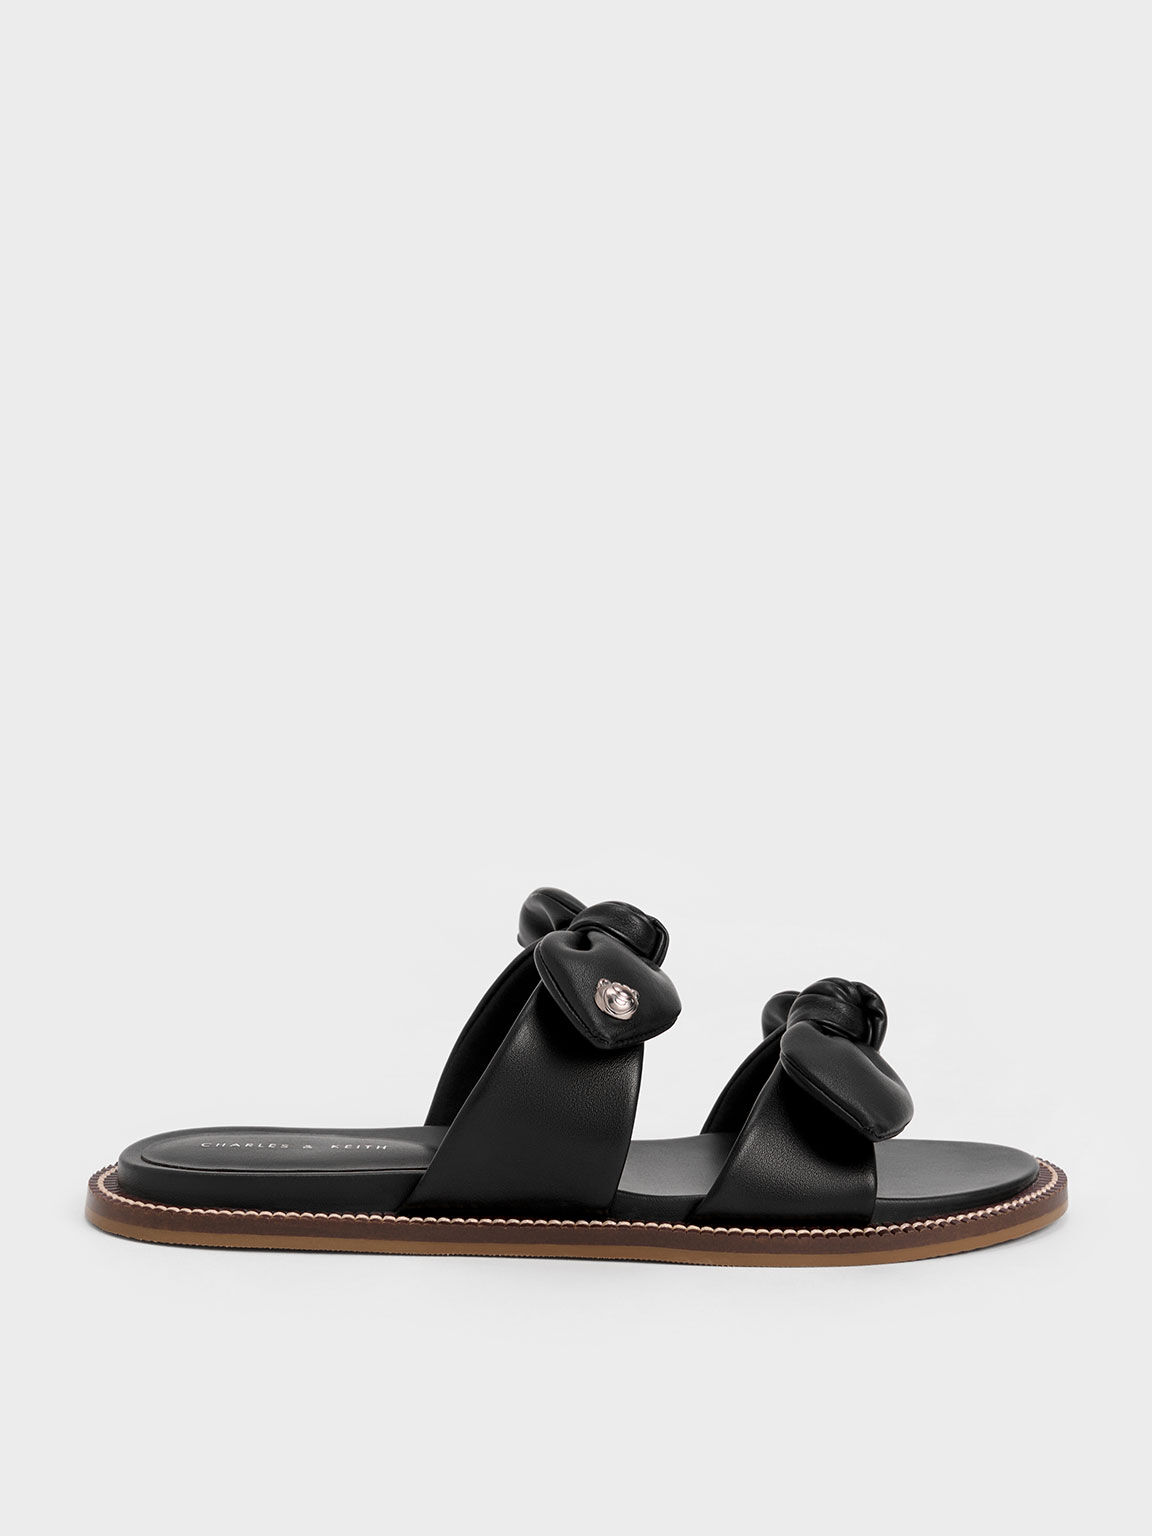 Giày sandals quai ngang Lotso Double Knotted, Đen, hi-res